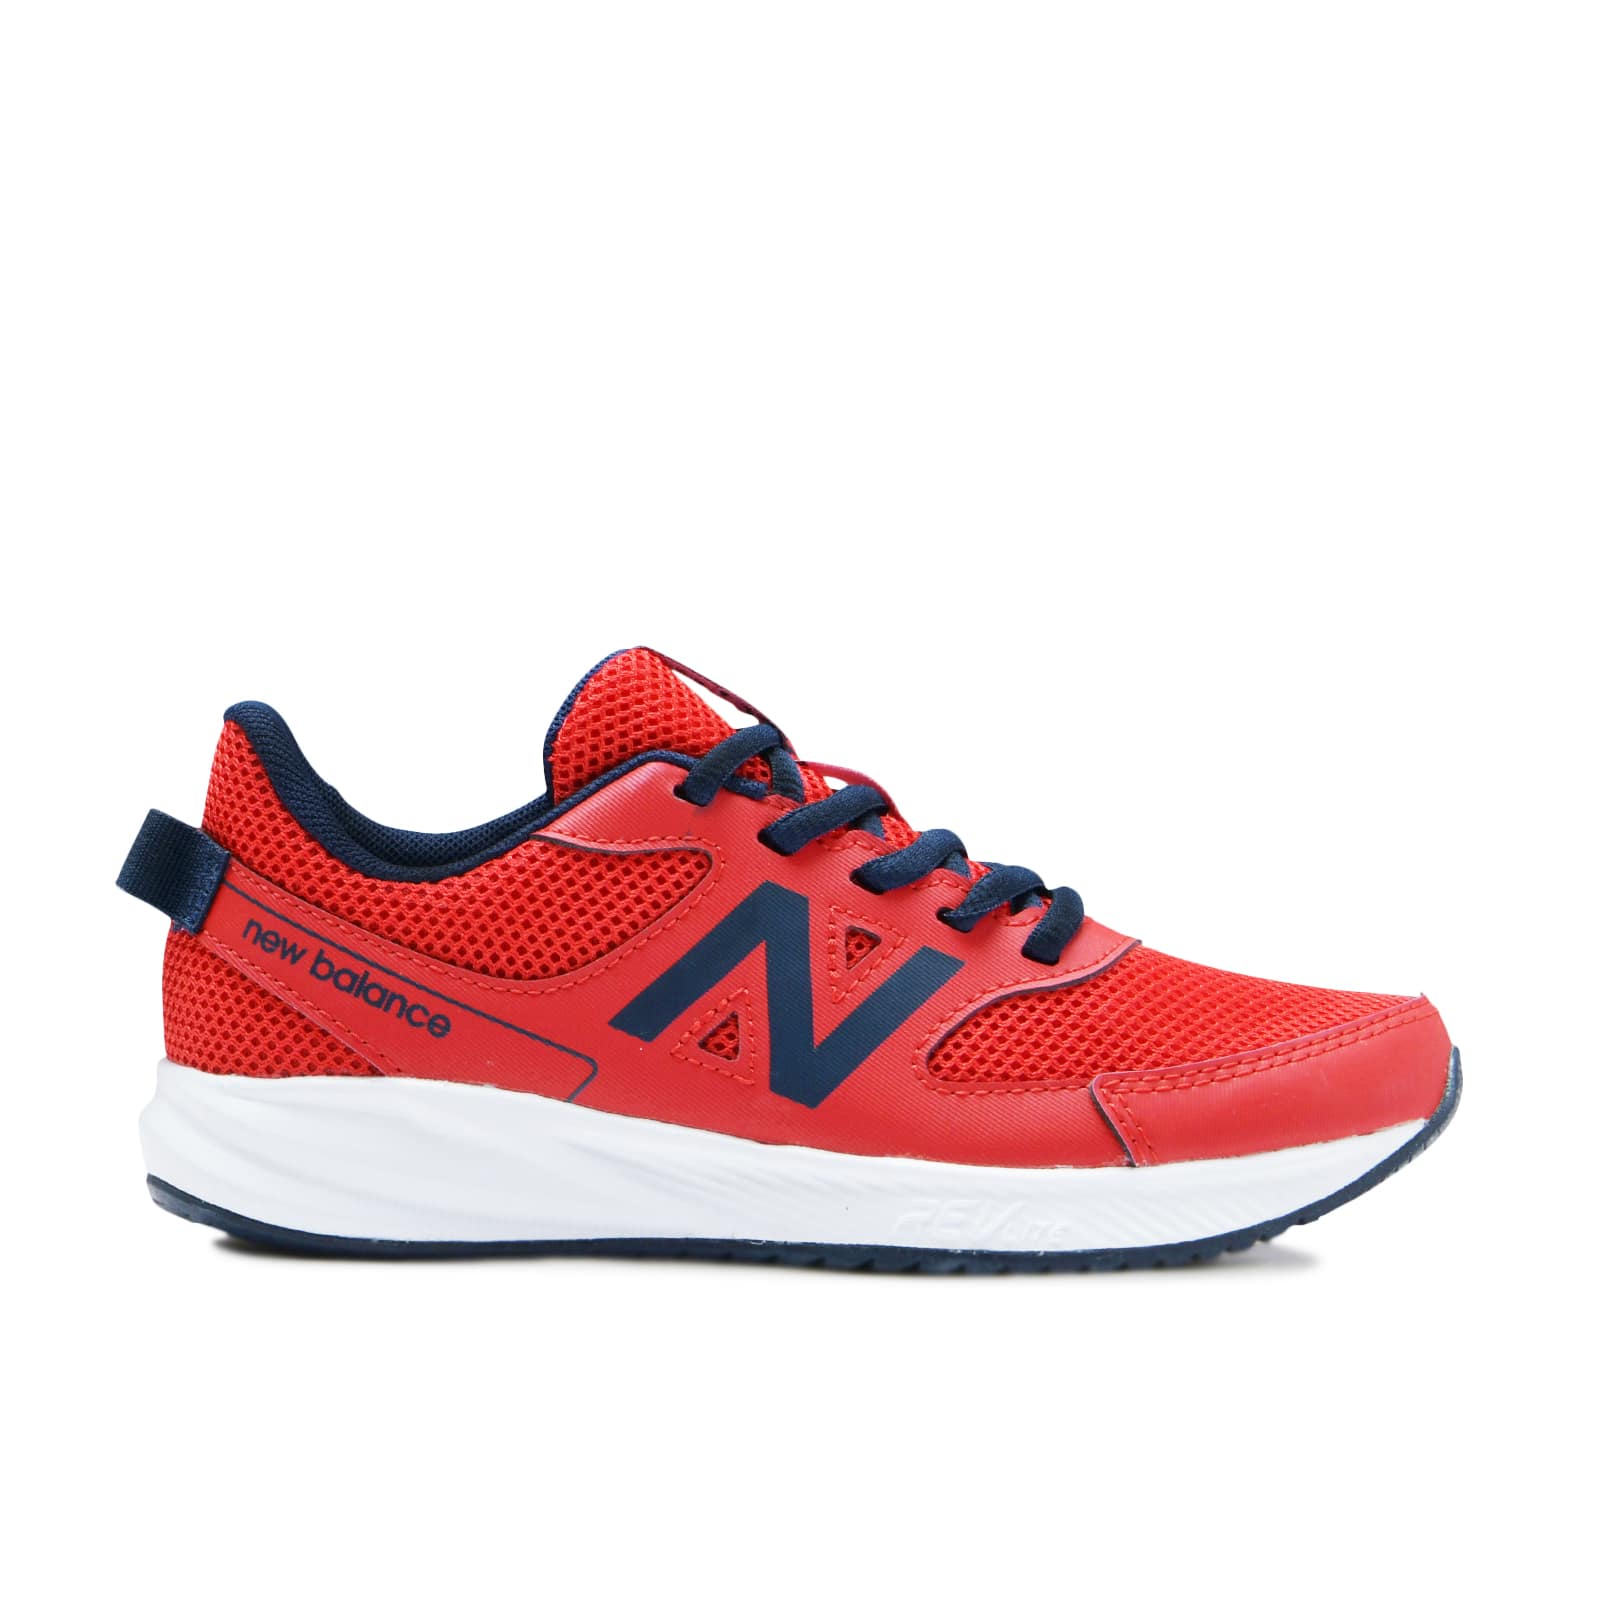 NB公式アウトレット】ニューバランス | 570 v3 Lace RN3|New